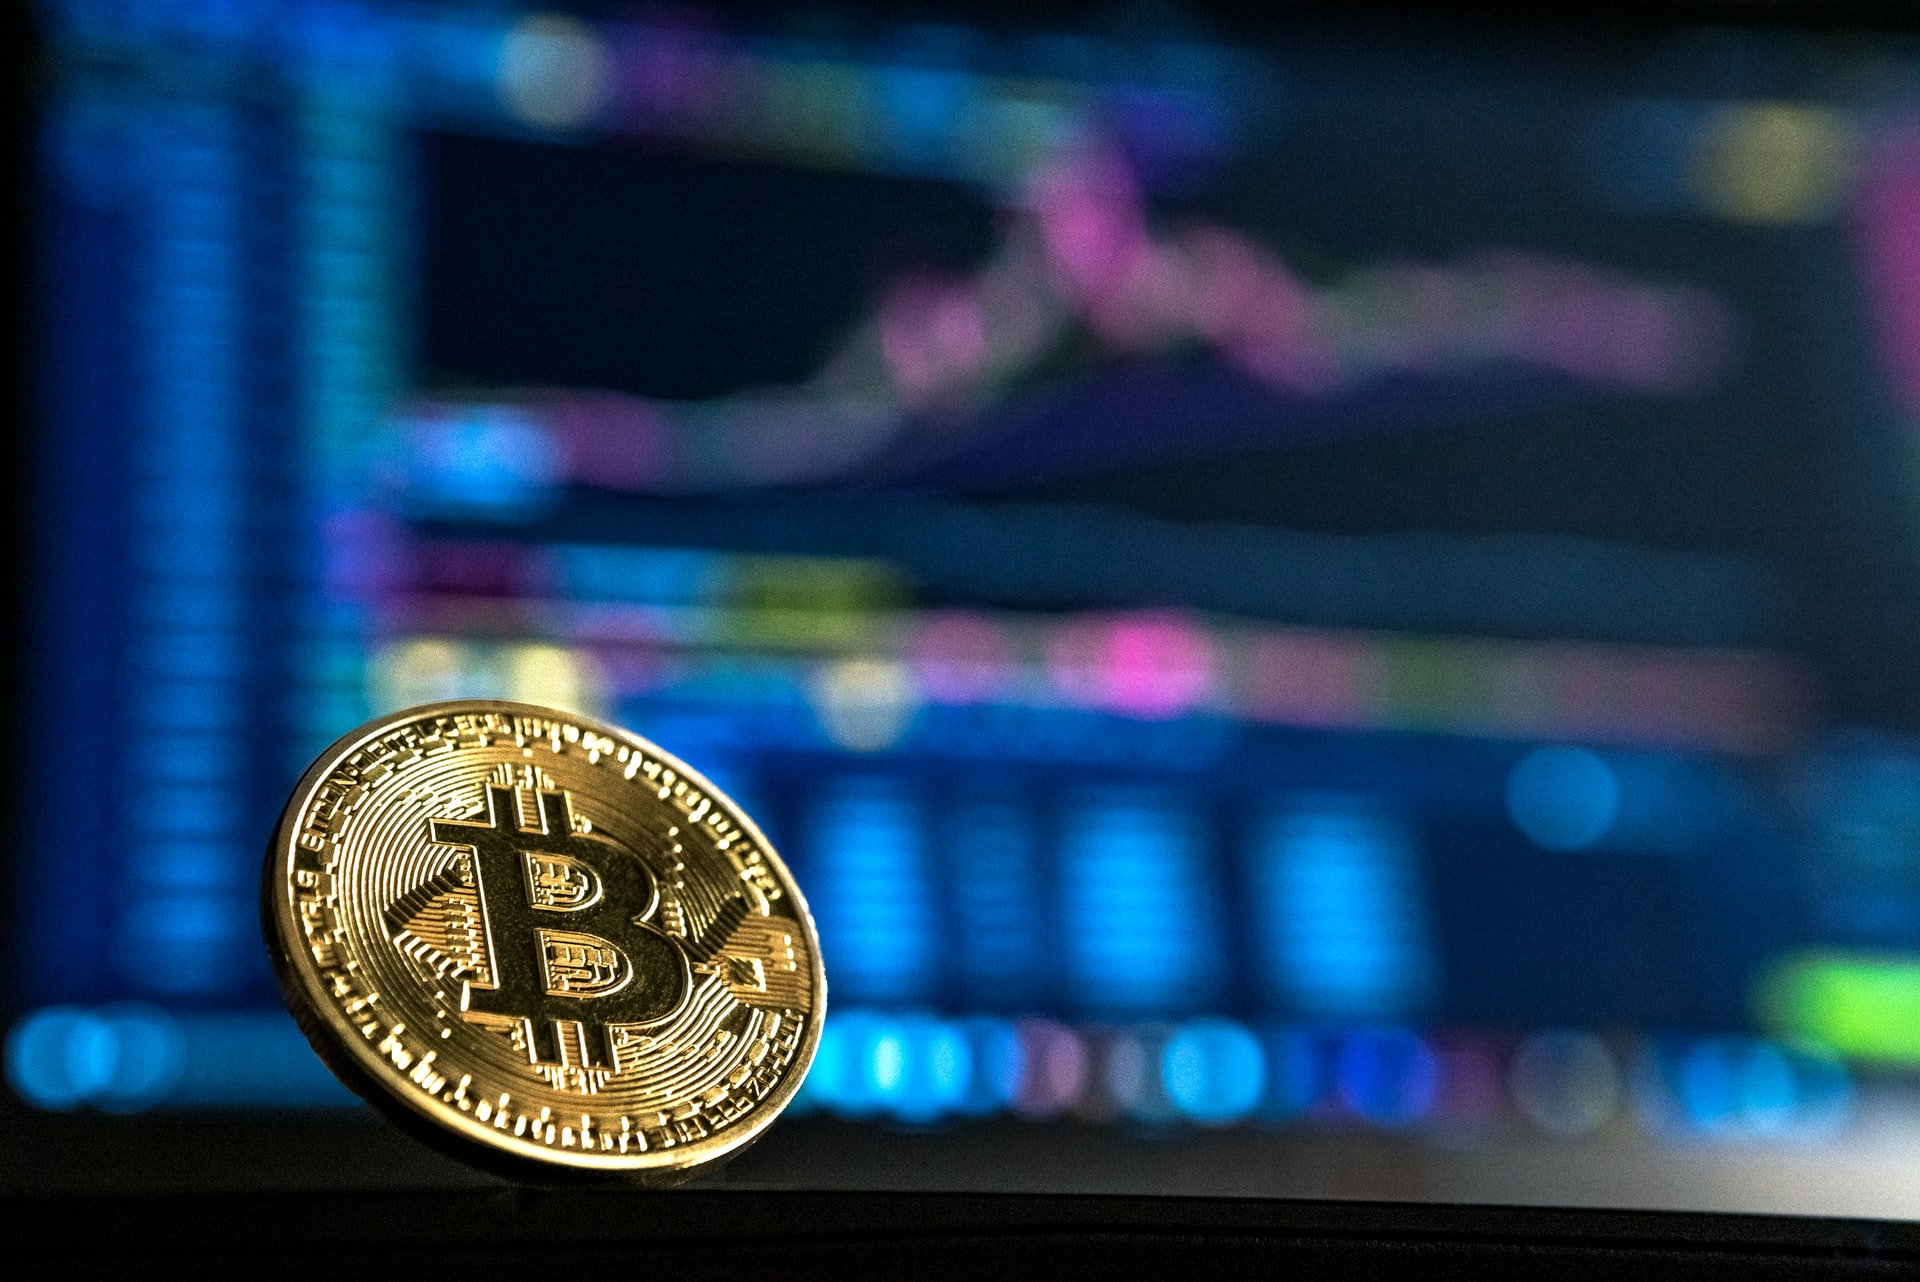 Why isn't Bitcoin attractive to leading Economists?